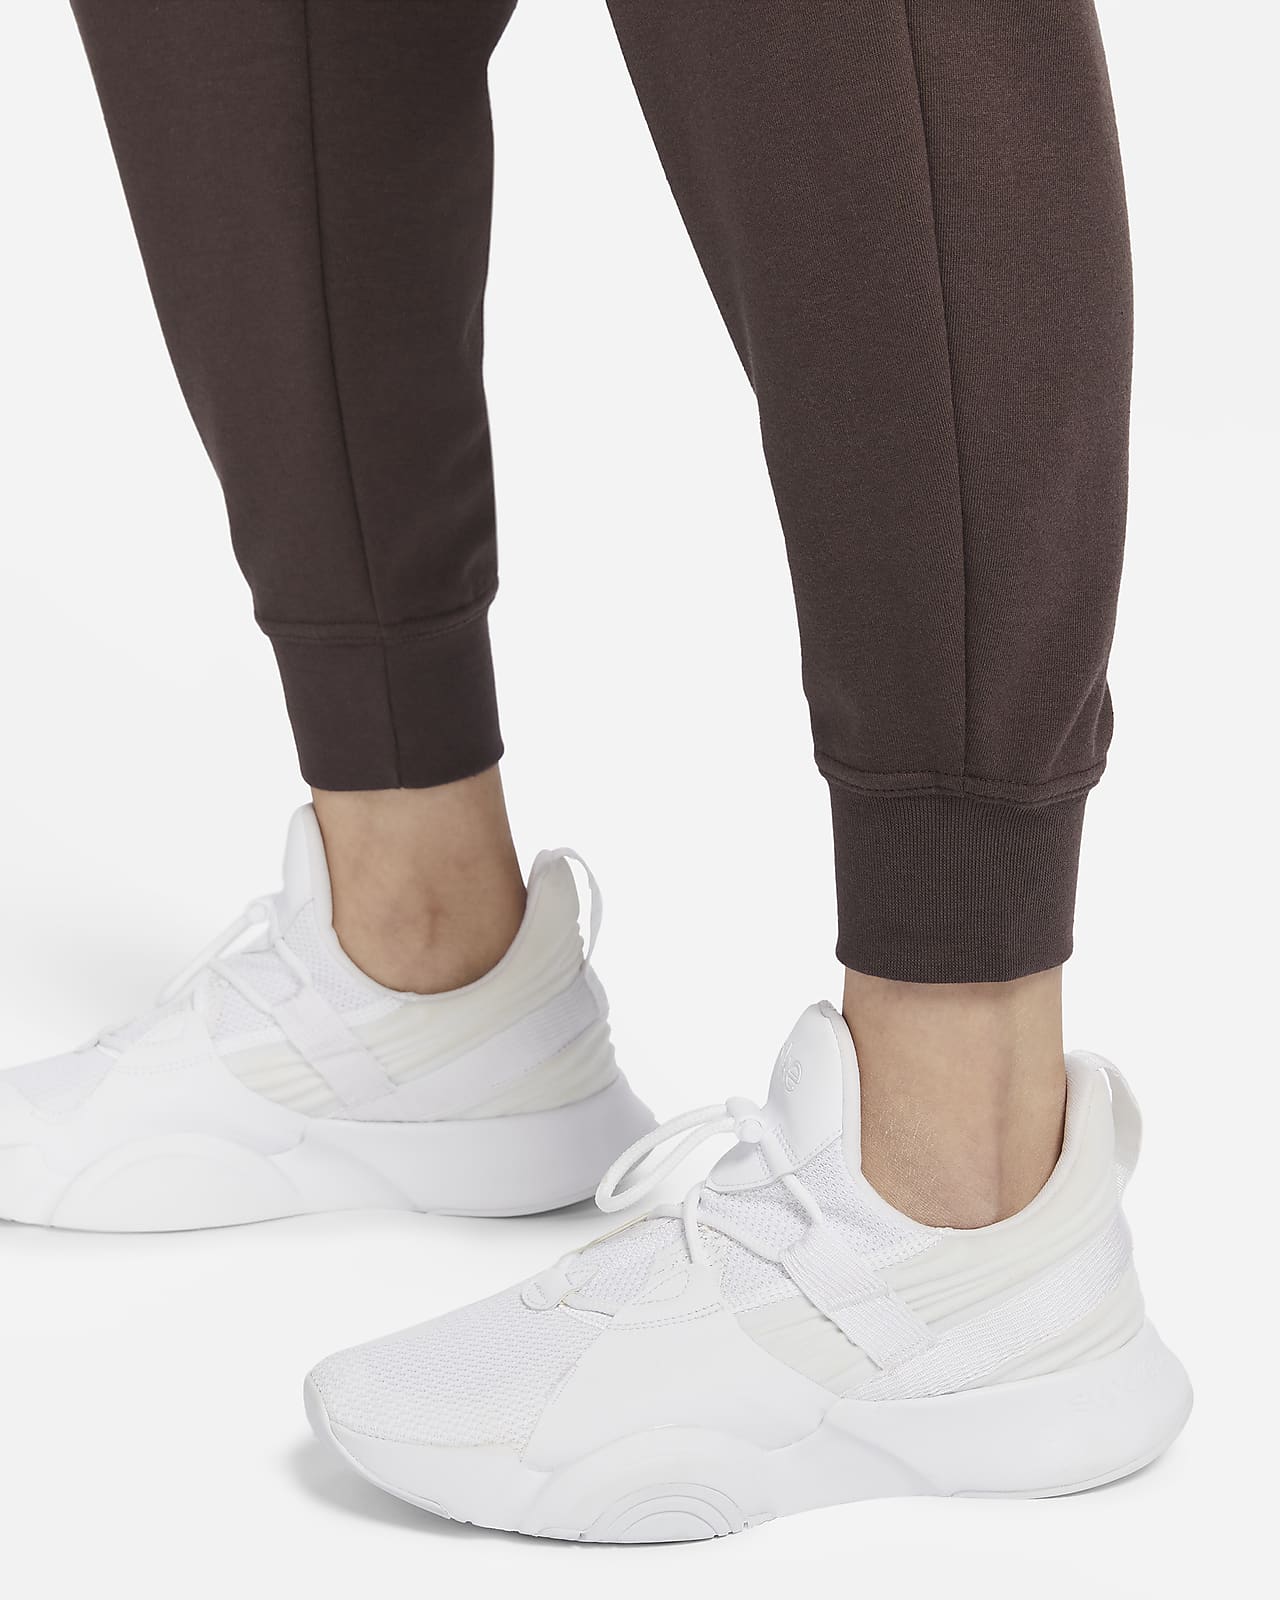 Nike Dri-FIT One Women's High-Waisted 7/8 French Terry Joggers. Nike JP